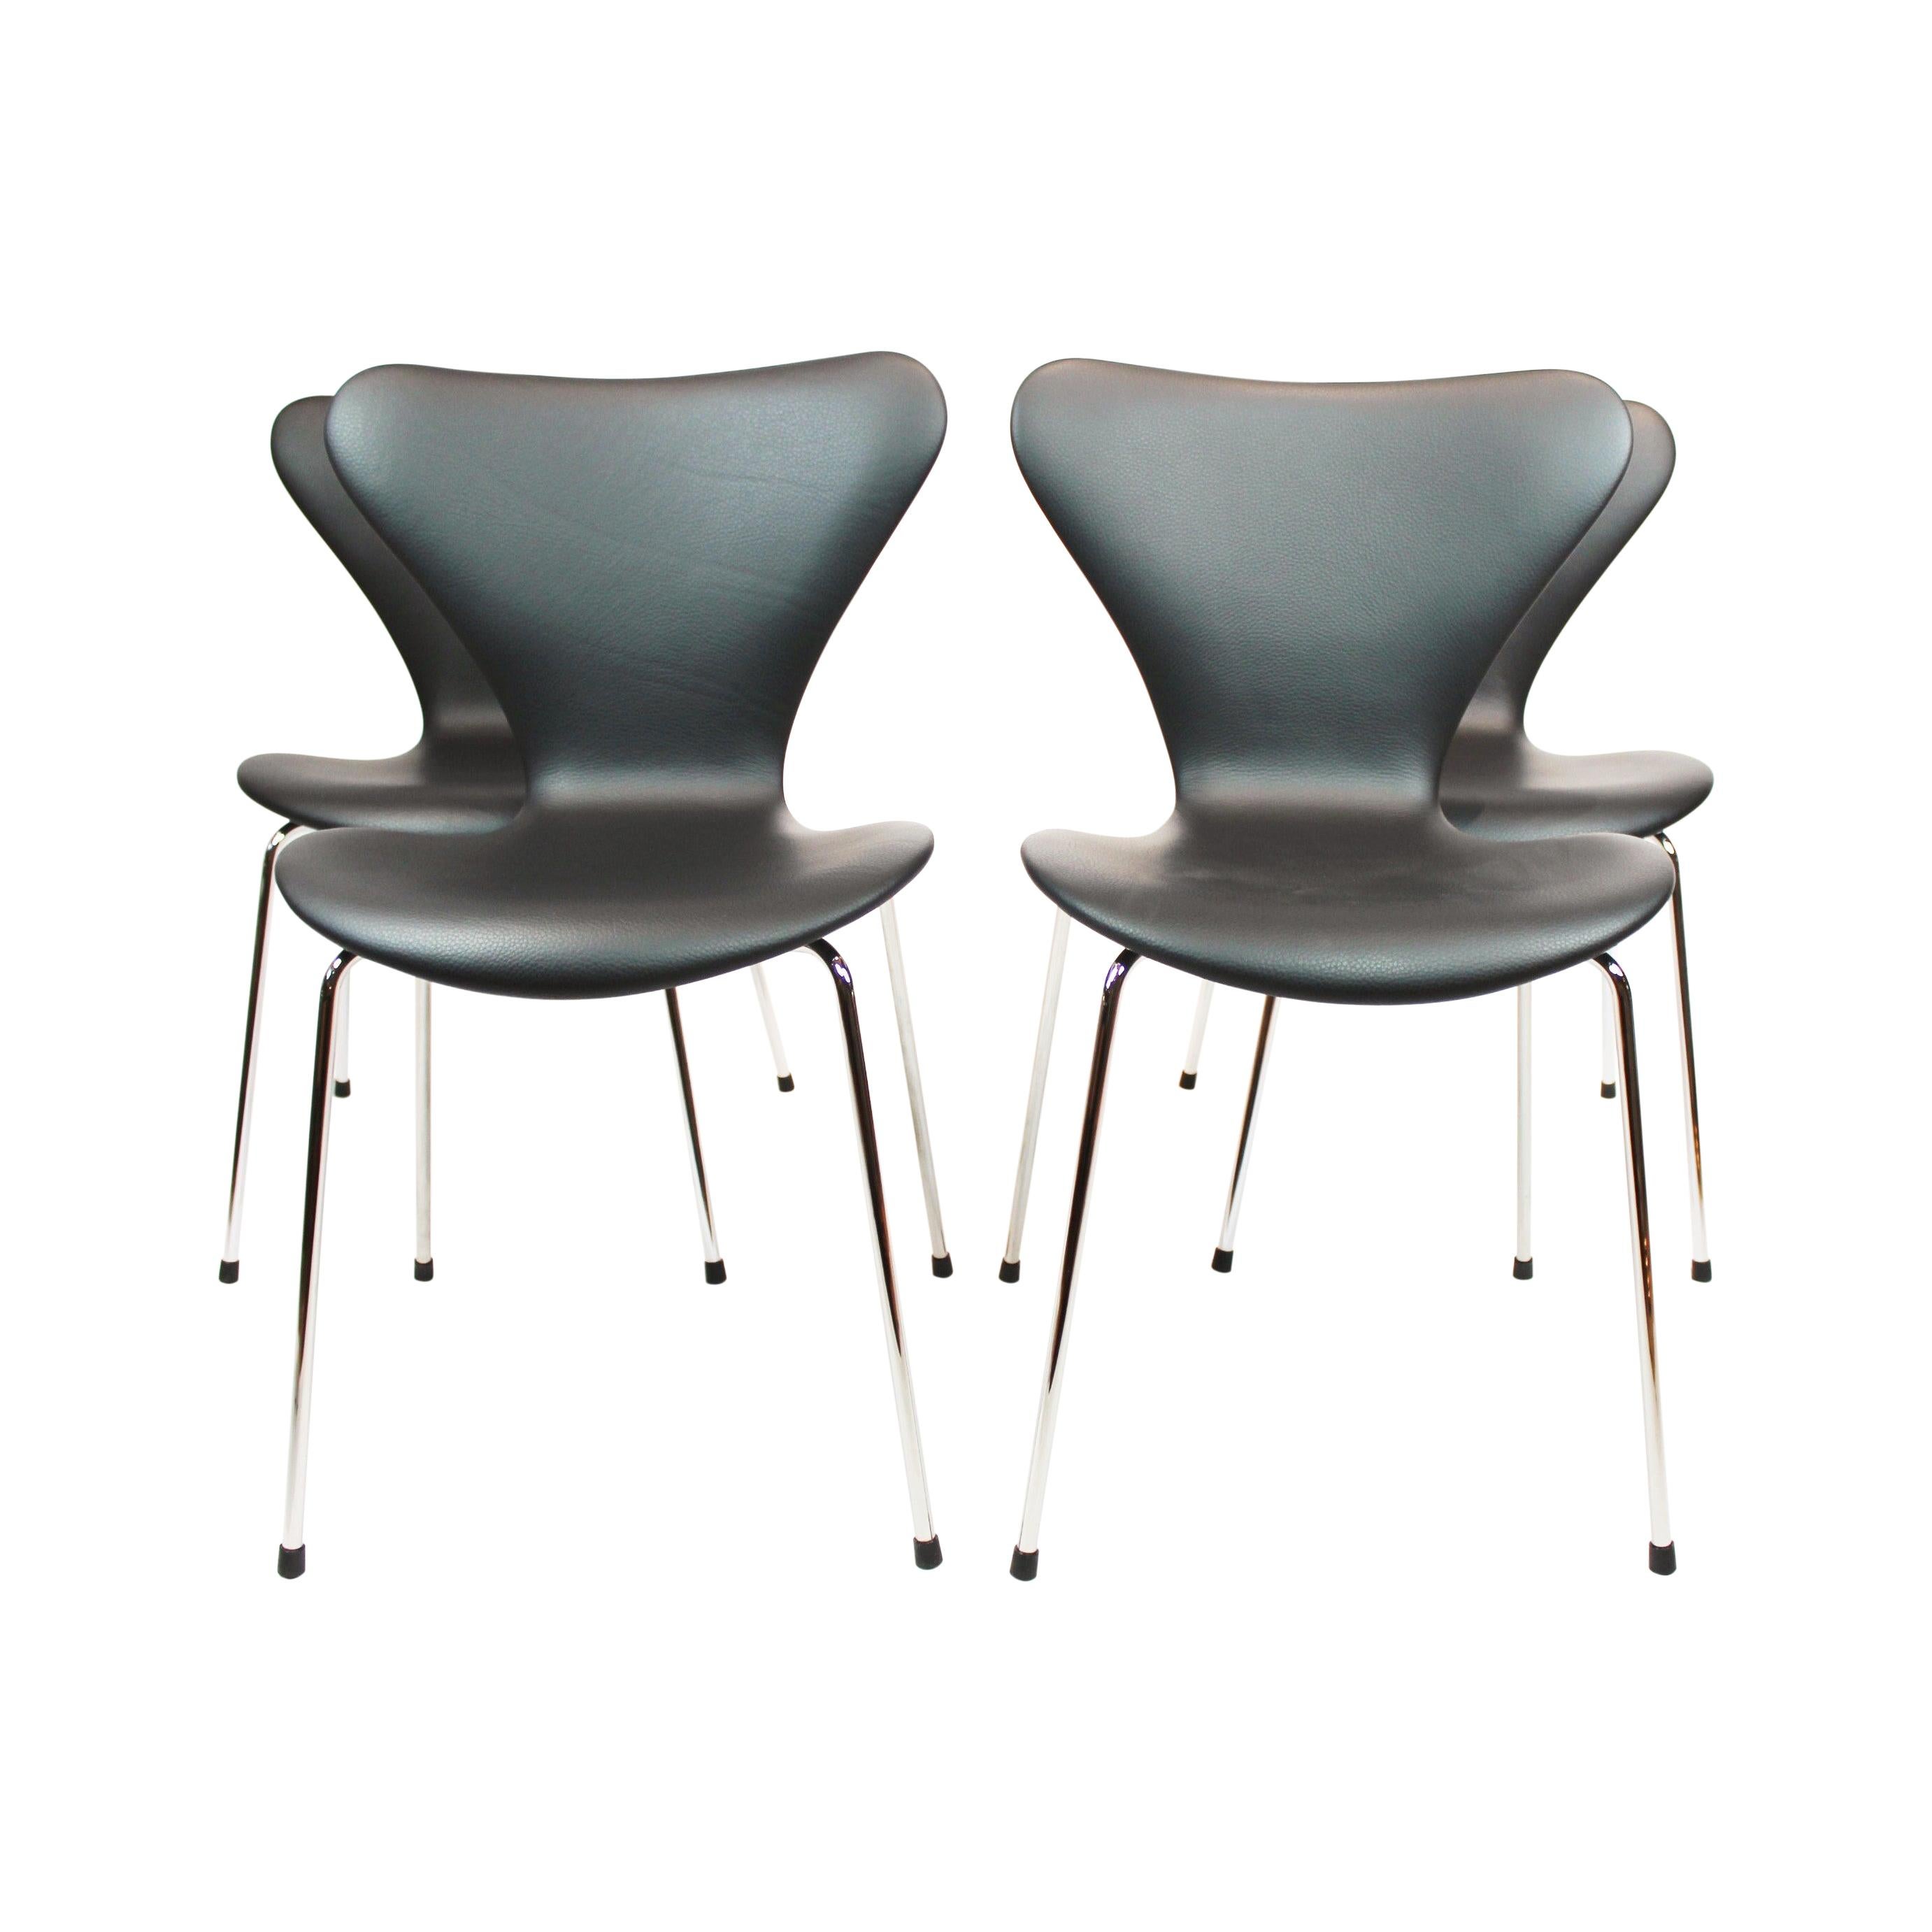 Set of 4 Series 7 chairs, Black Leather, Model 3107, Designed by Arne Jacobsen